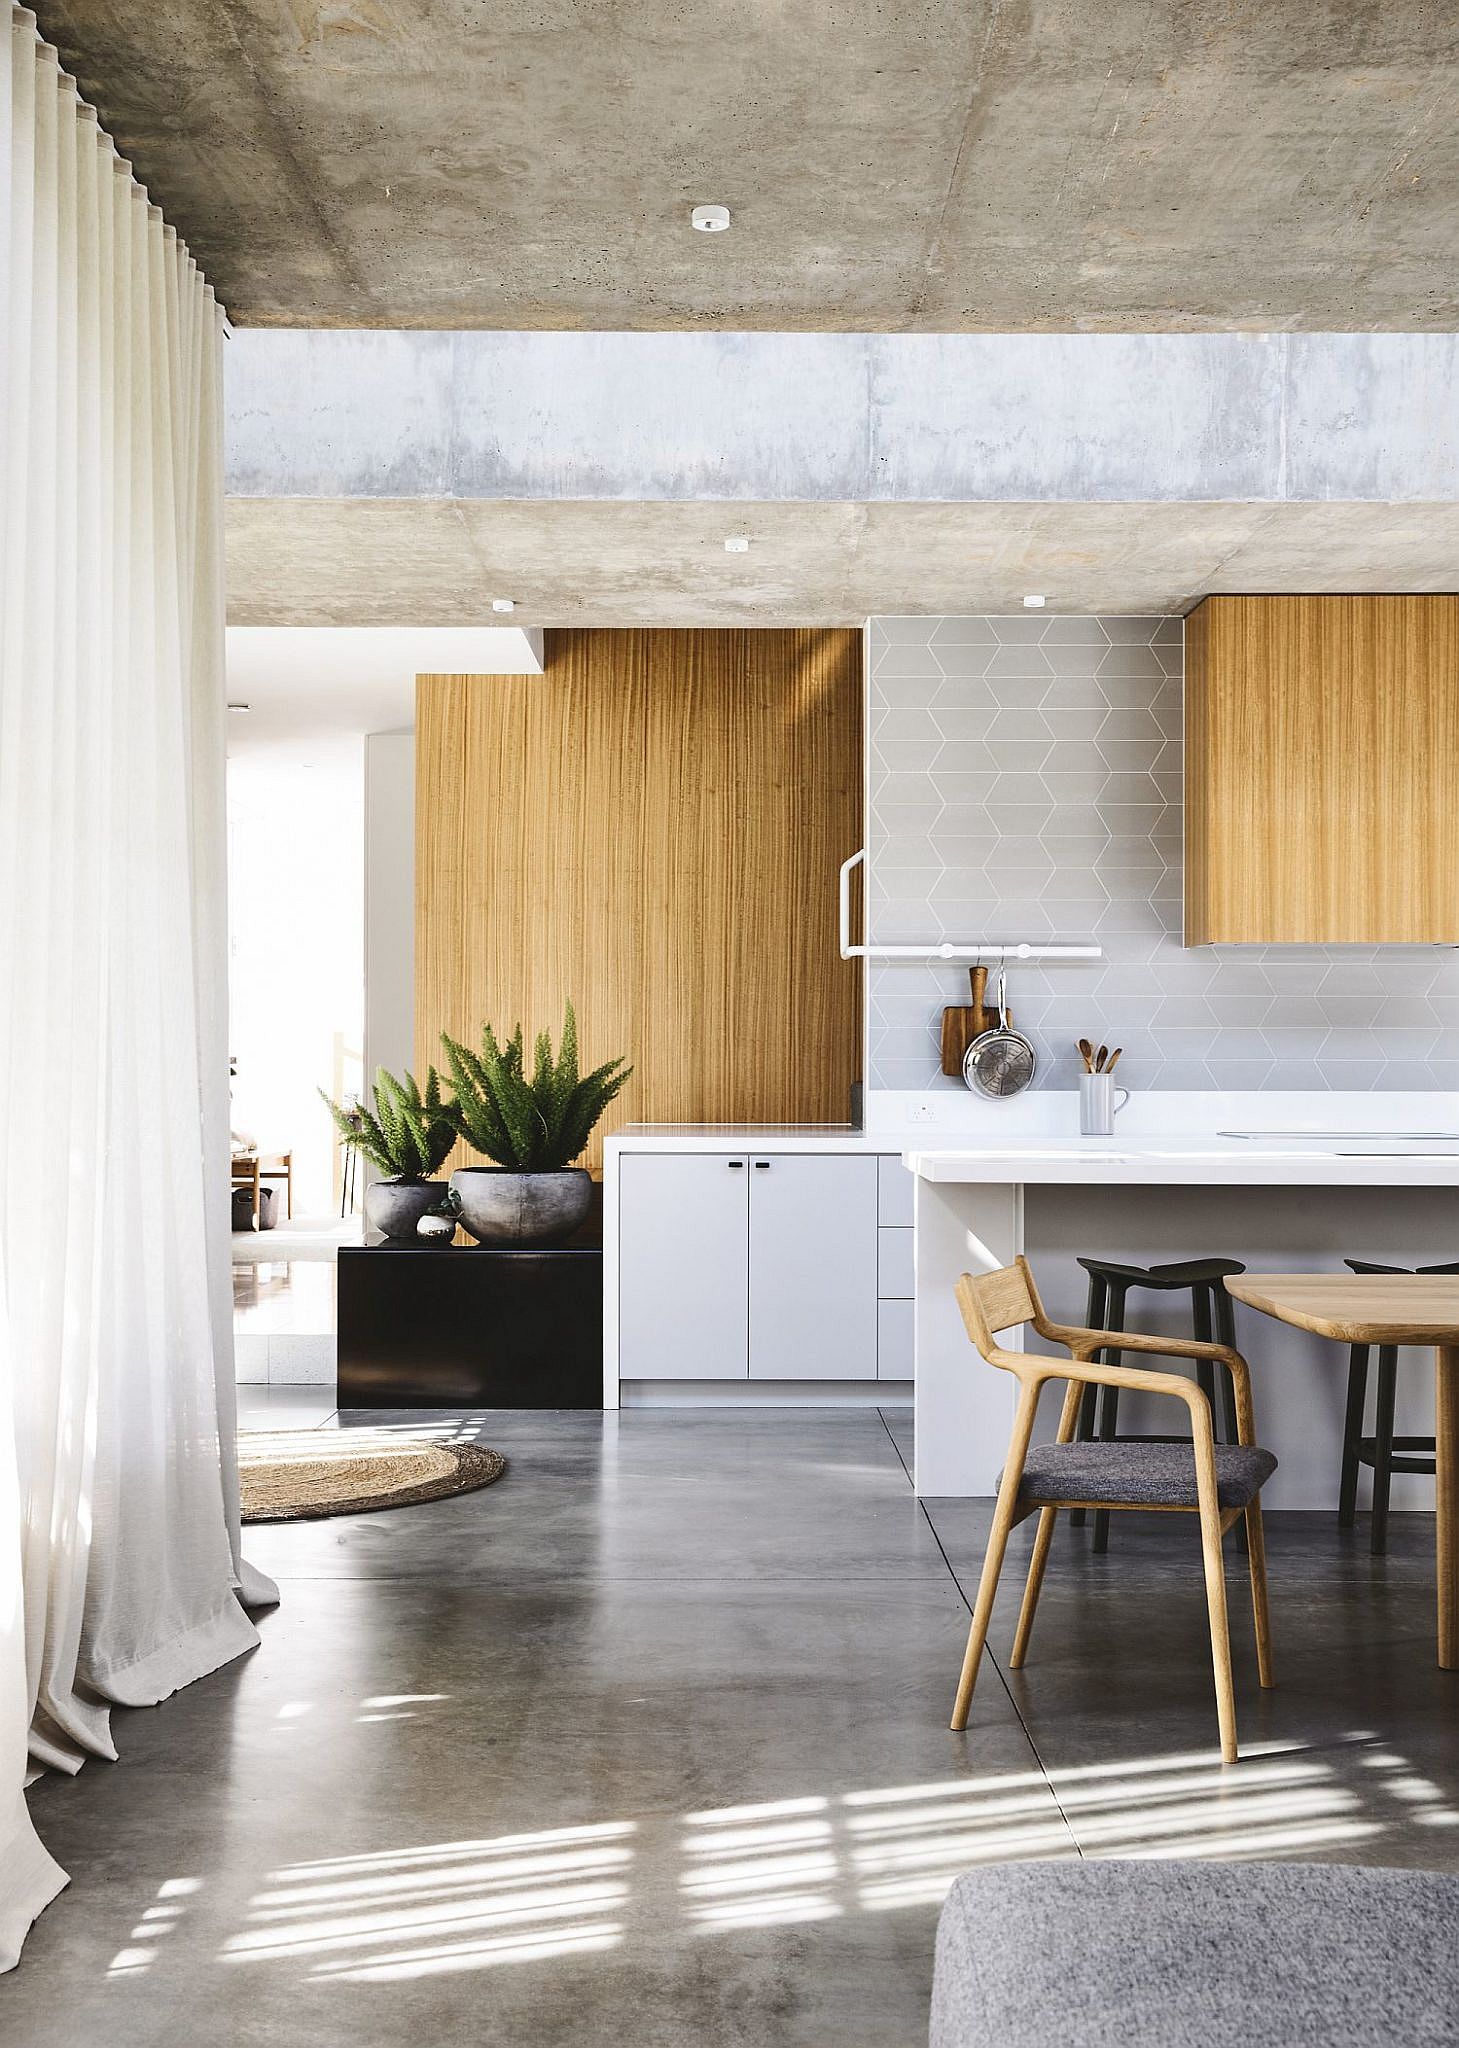 Concrete-with-raw-finish-for-the-ceiling-gives-the-home-a-unique-look